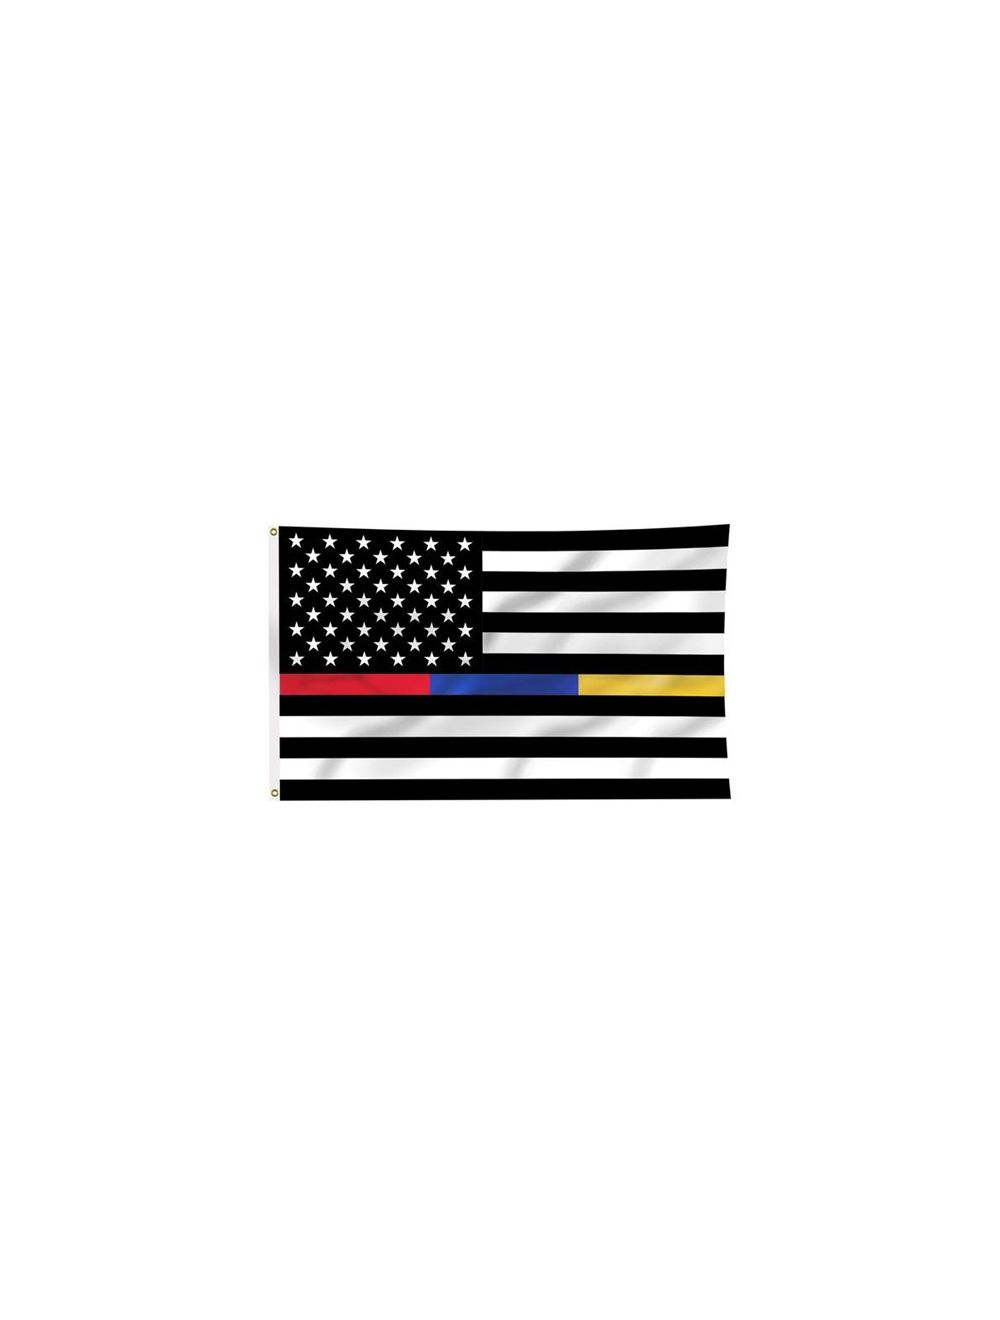 Thin Blue Line American Flag with Grommets